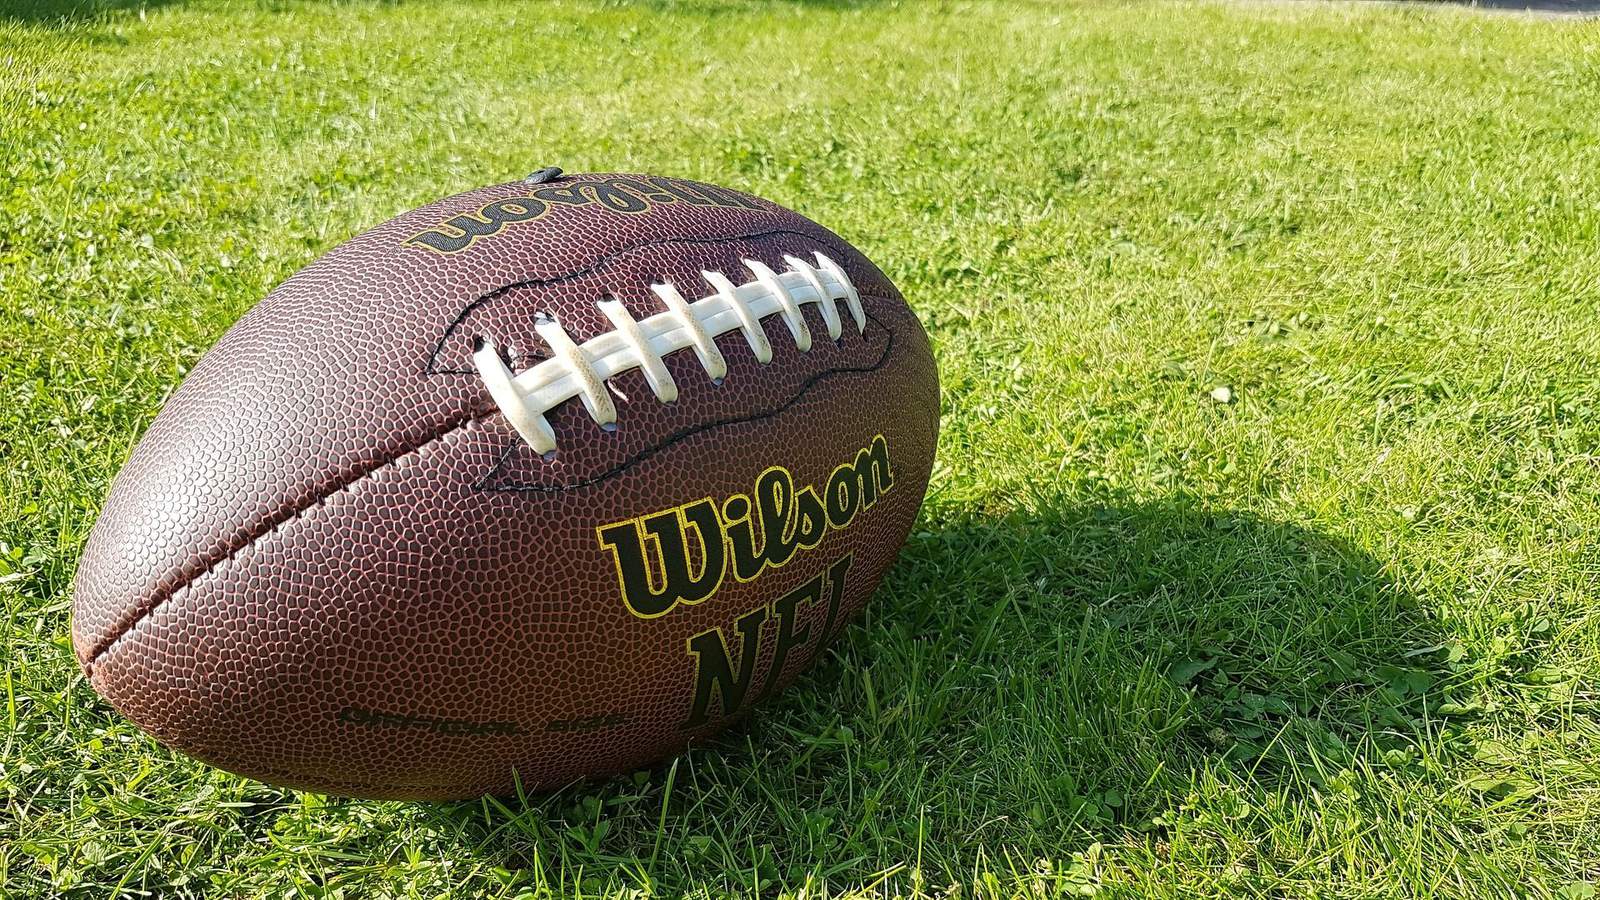 Praying for a win: Florida bill would OK it in school sports